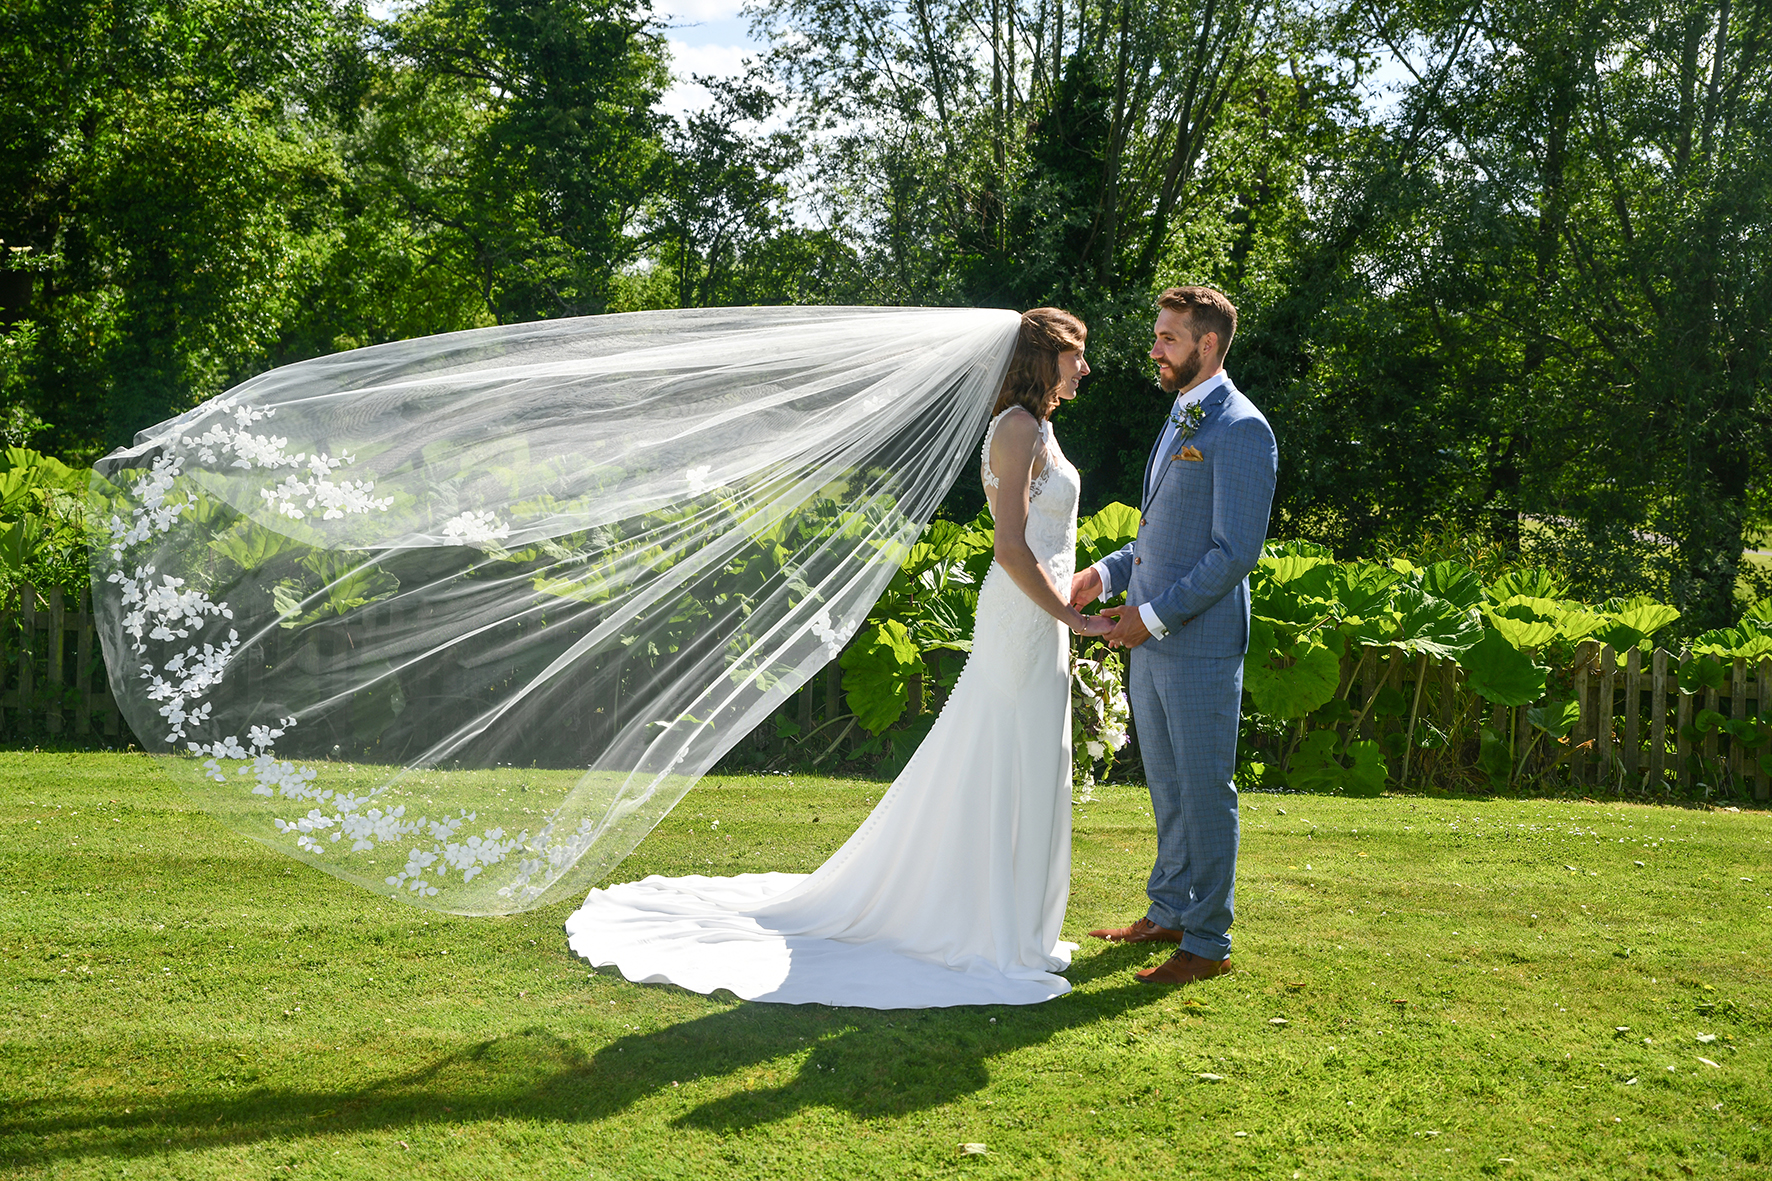 Wedding Photography in the garden at home